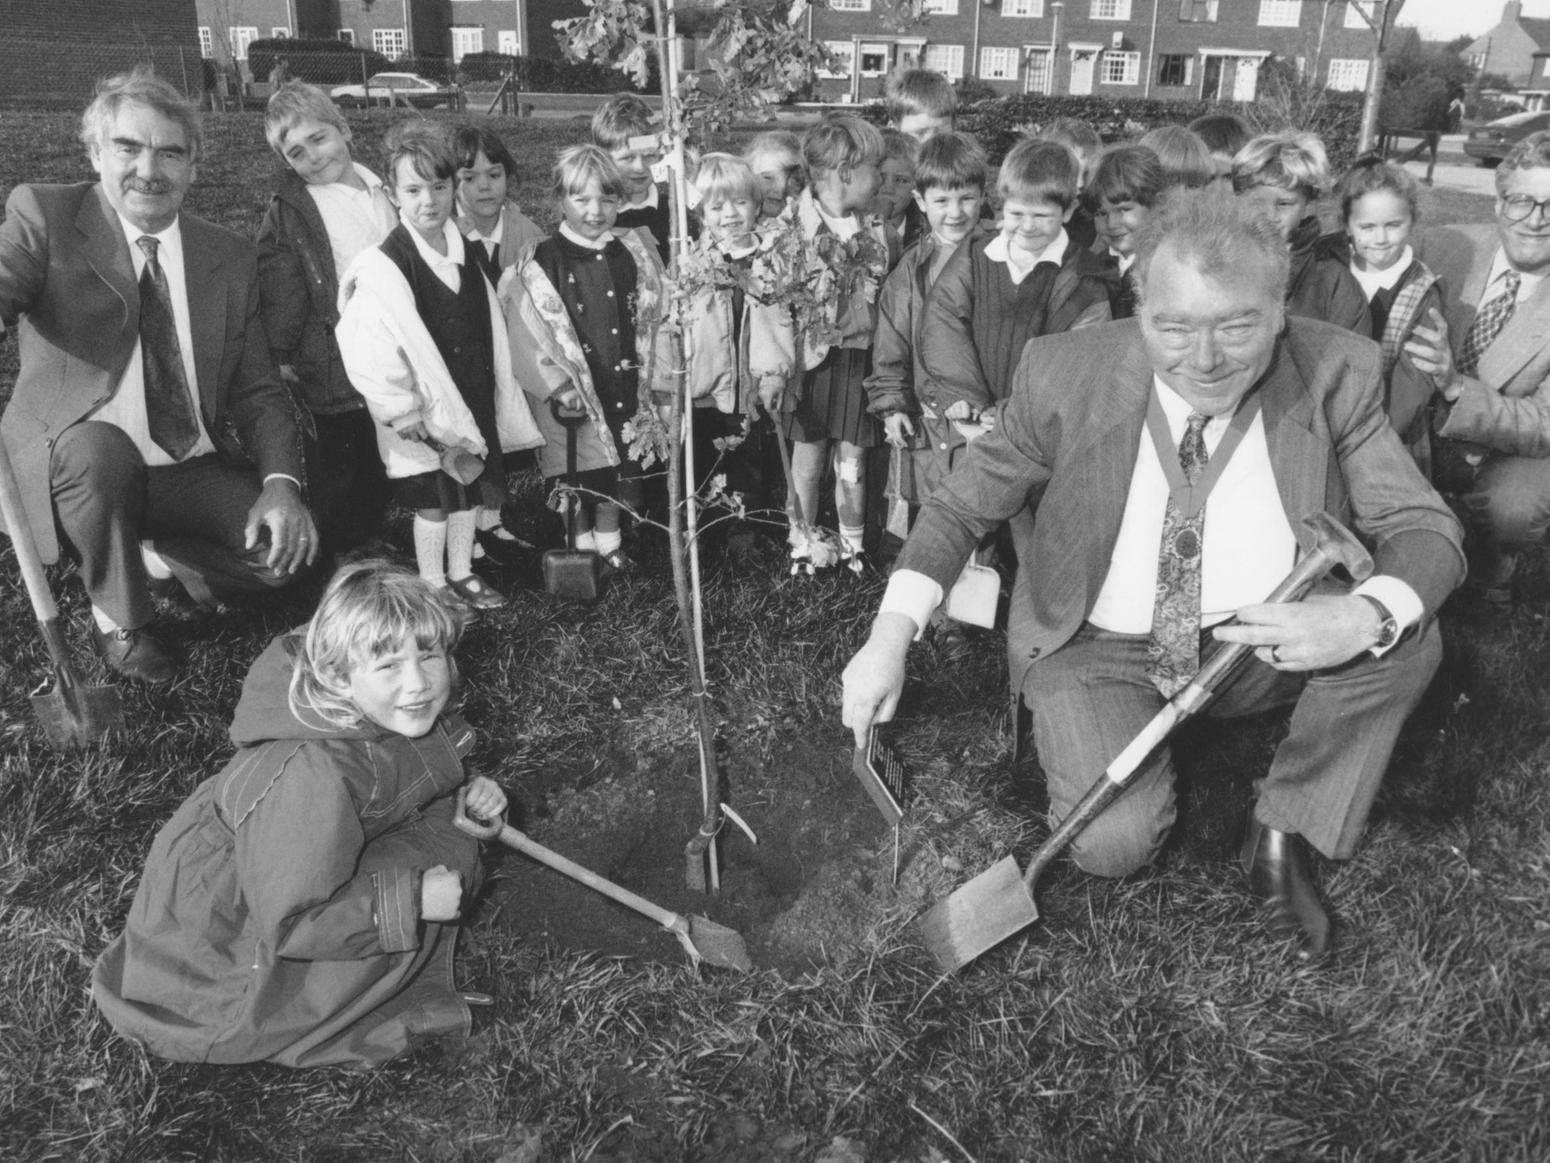 Pictured is chairman of Hunmanby Parish Council Pat Dowey, front right, adding the finishing touches to a tree planting at Hunmanby Country Primary School, assisted by five year old pupil Lauren Dobson, and watched by other pupils and teachers from the school. Photo taken in November 1994.